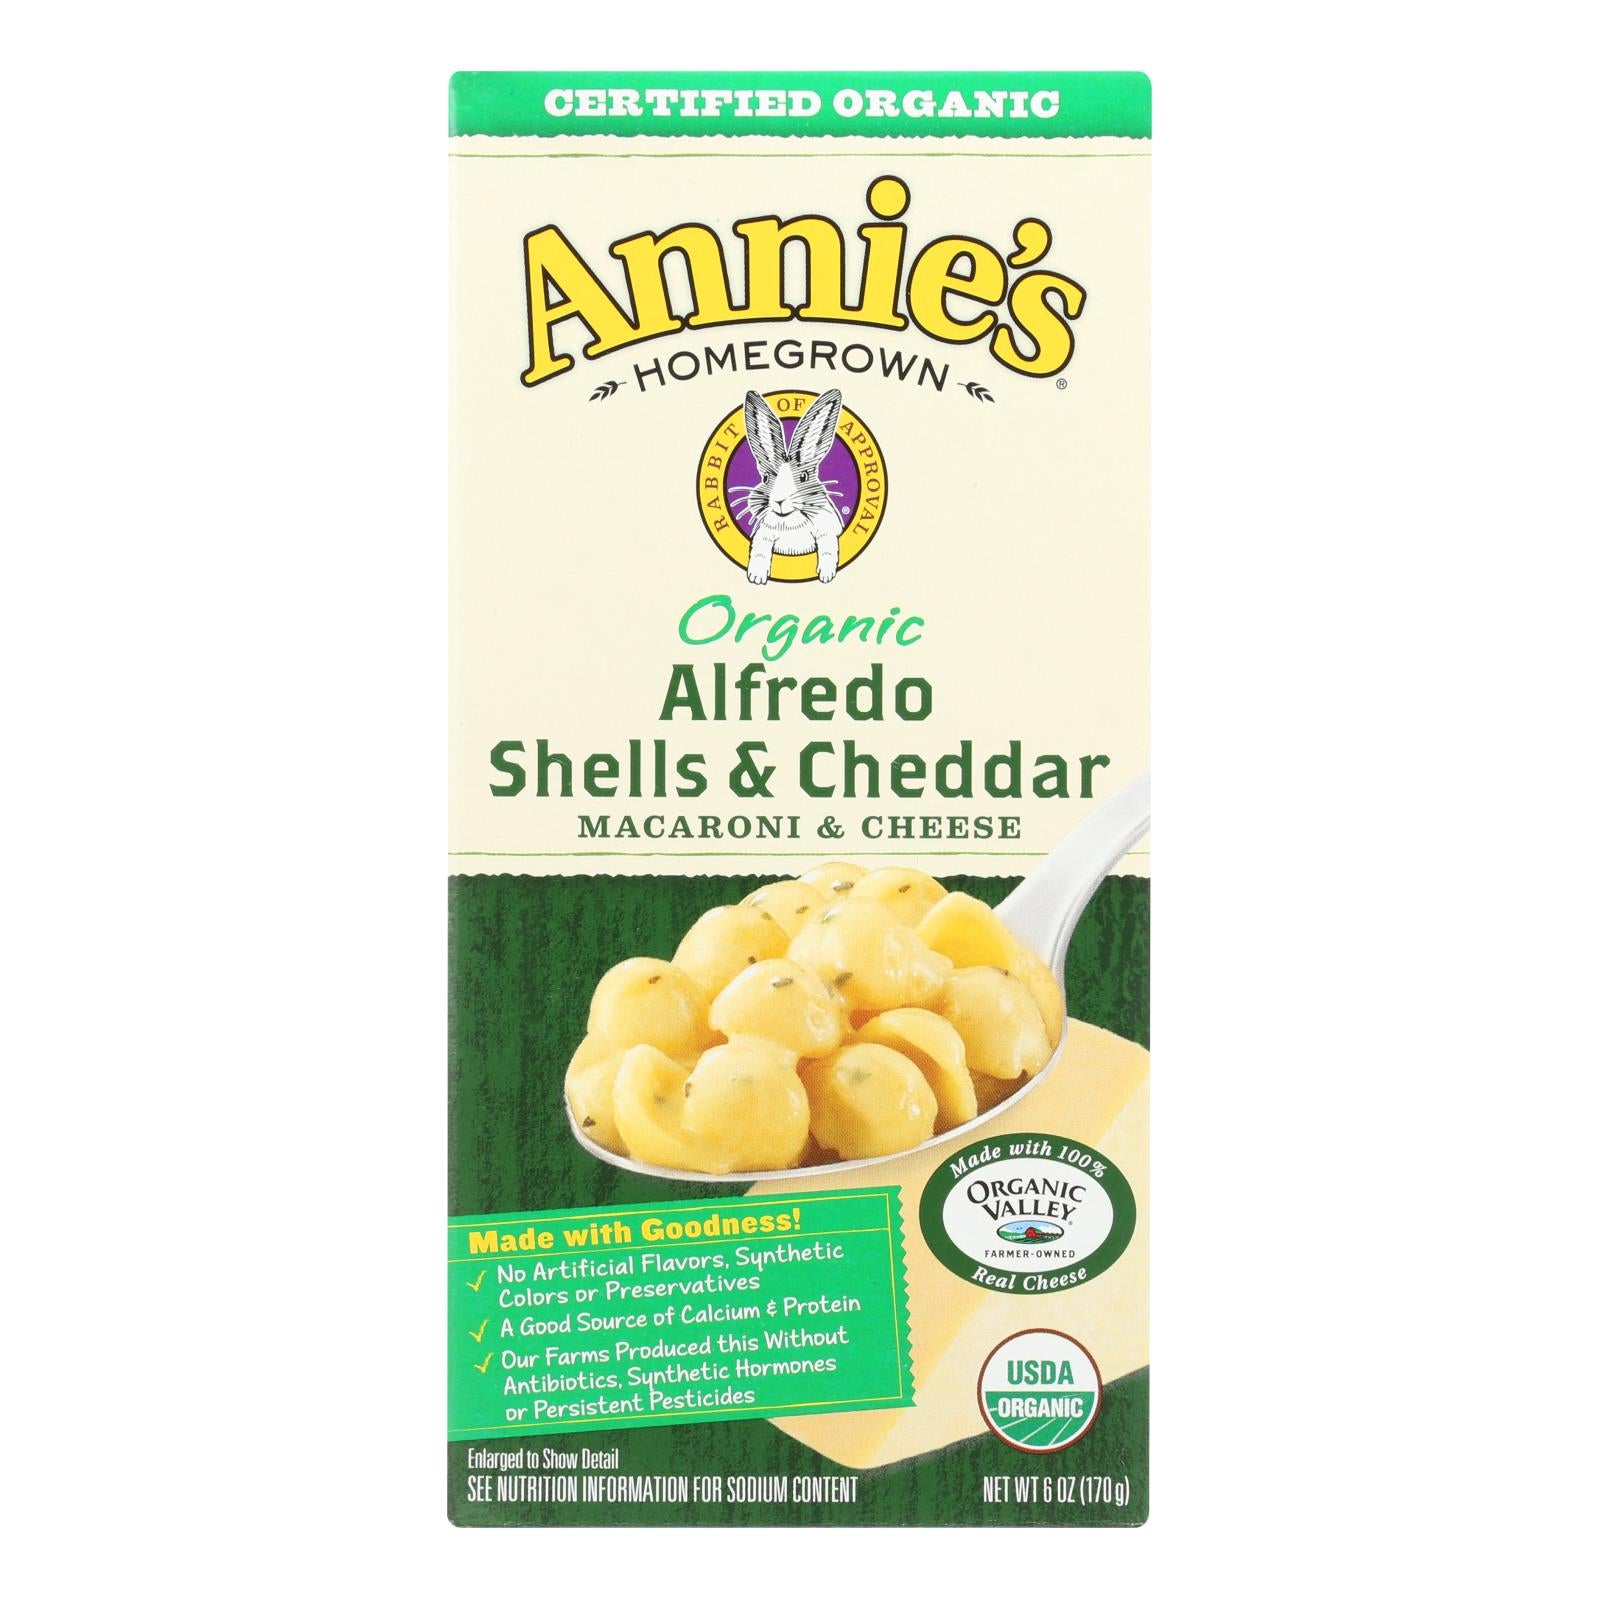 Annie'S Homegrown, Annies Homegrown Macaroni and Cheese - Organic - Alfredo Shells and Cheddar - 6 oz - case of 12 (Pack of 12)